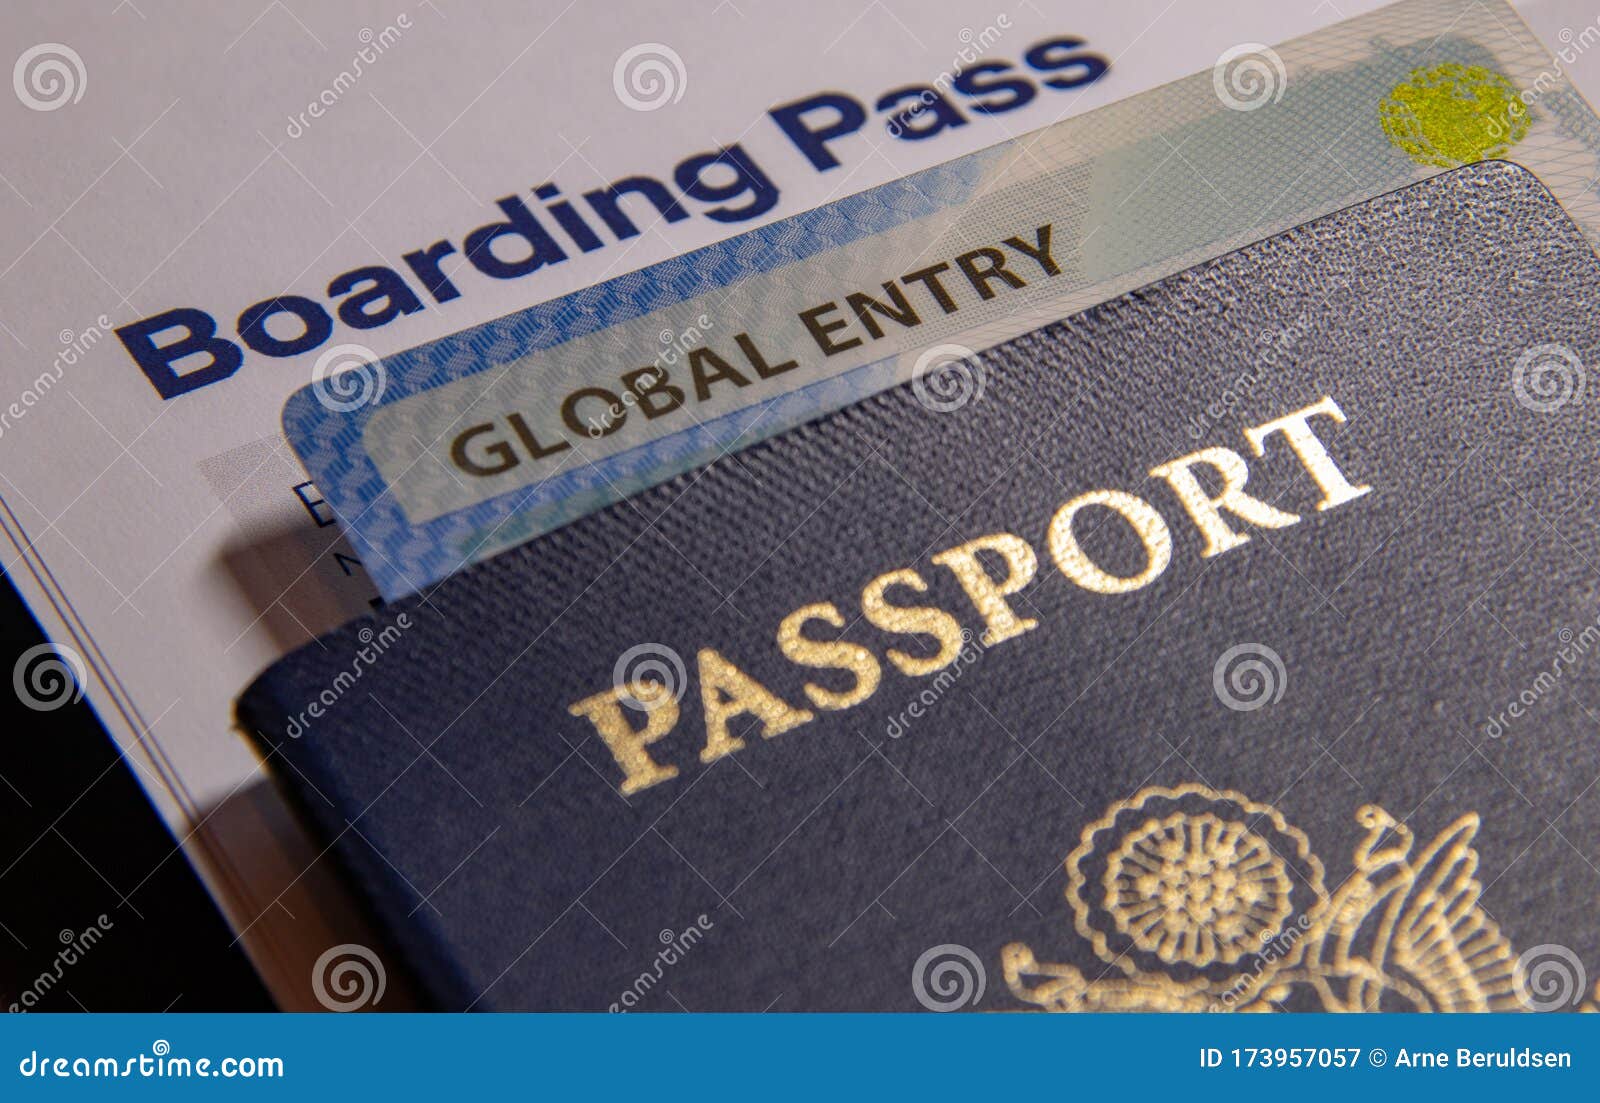 global entry card with usa passport and airline boarding pass